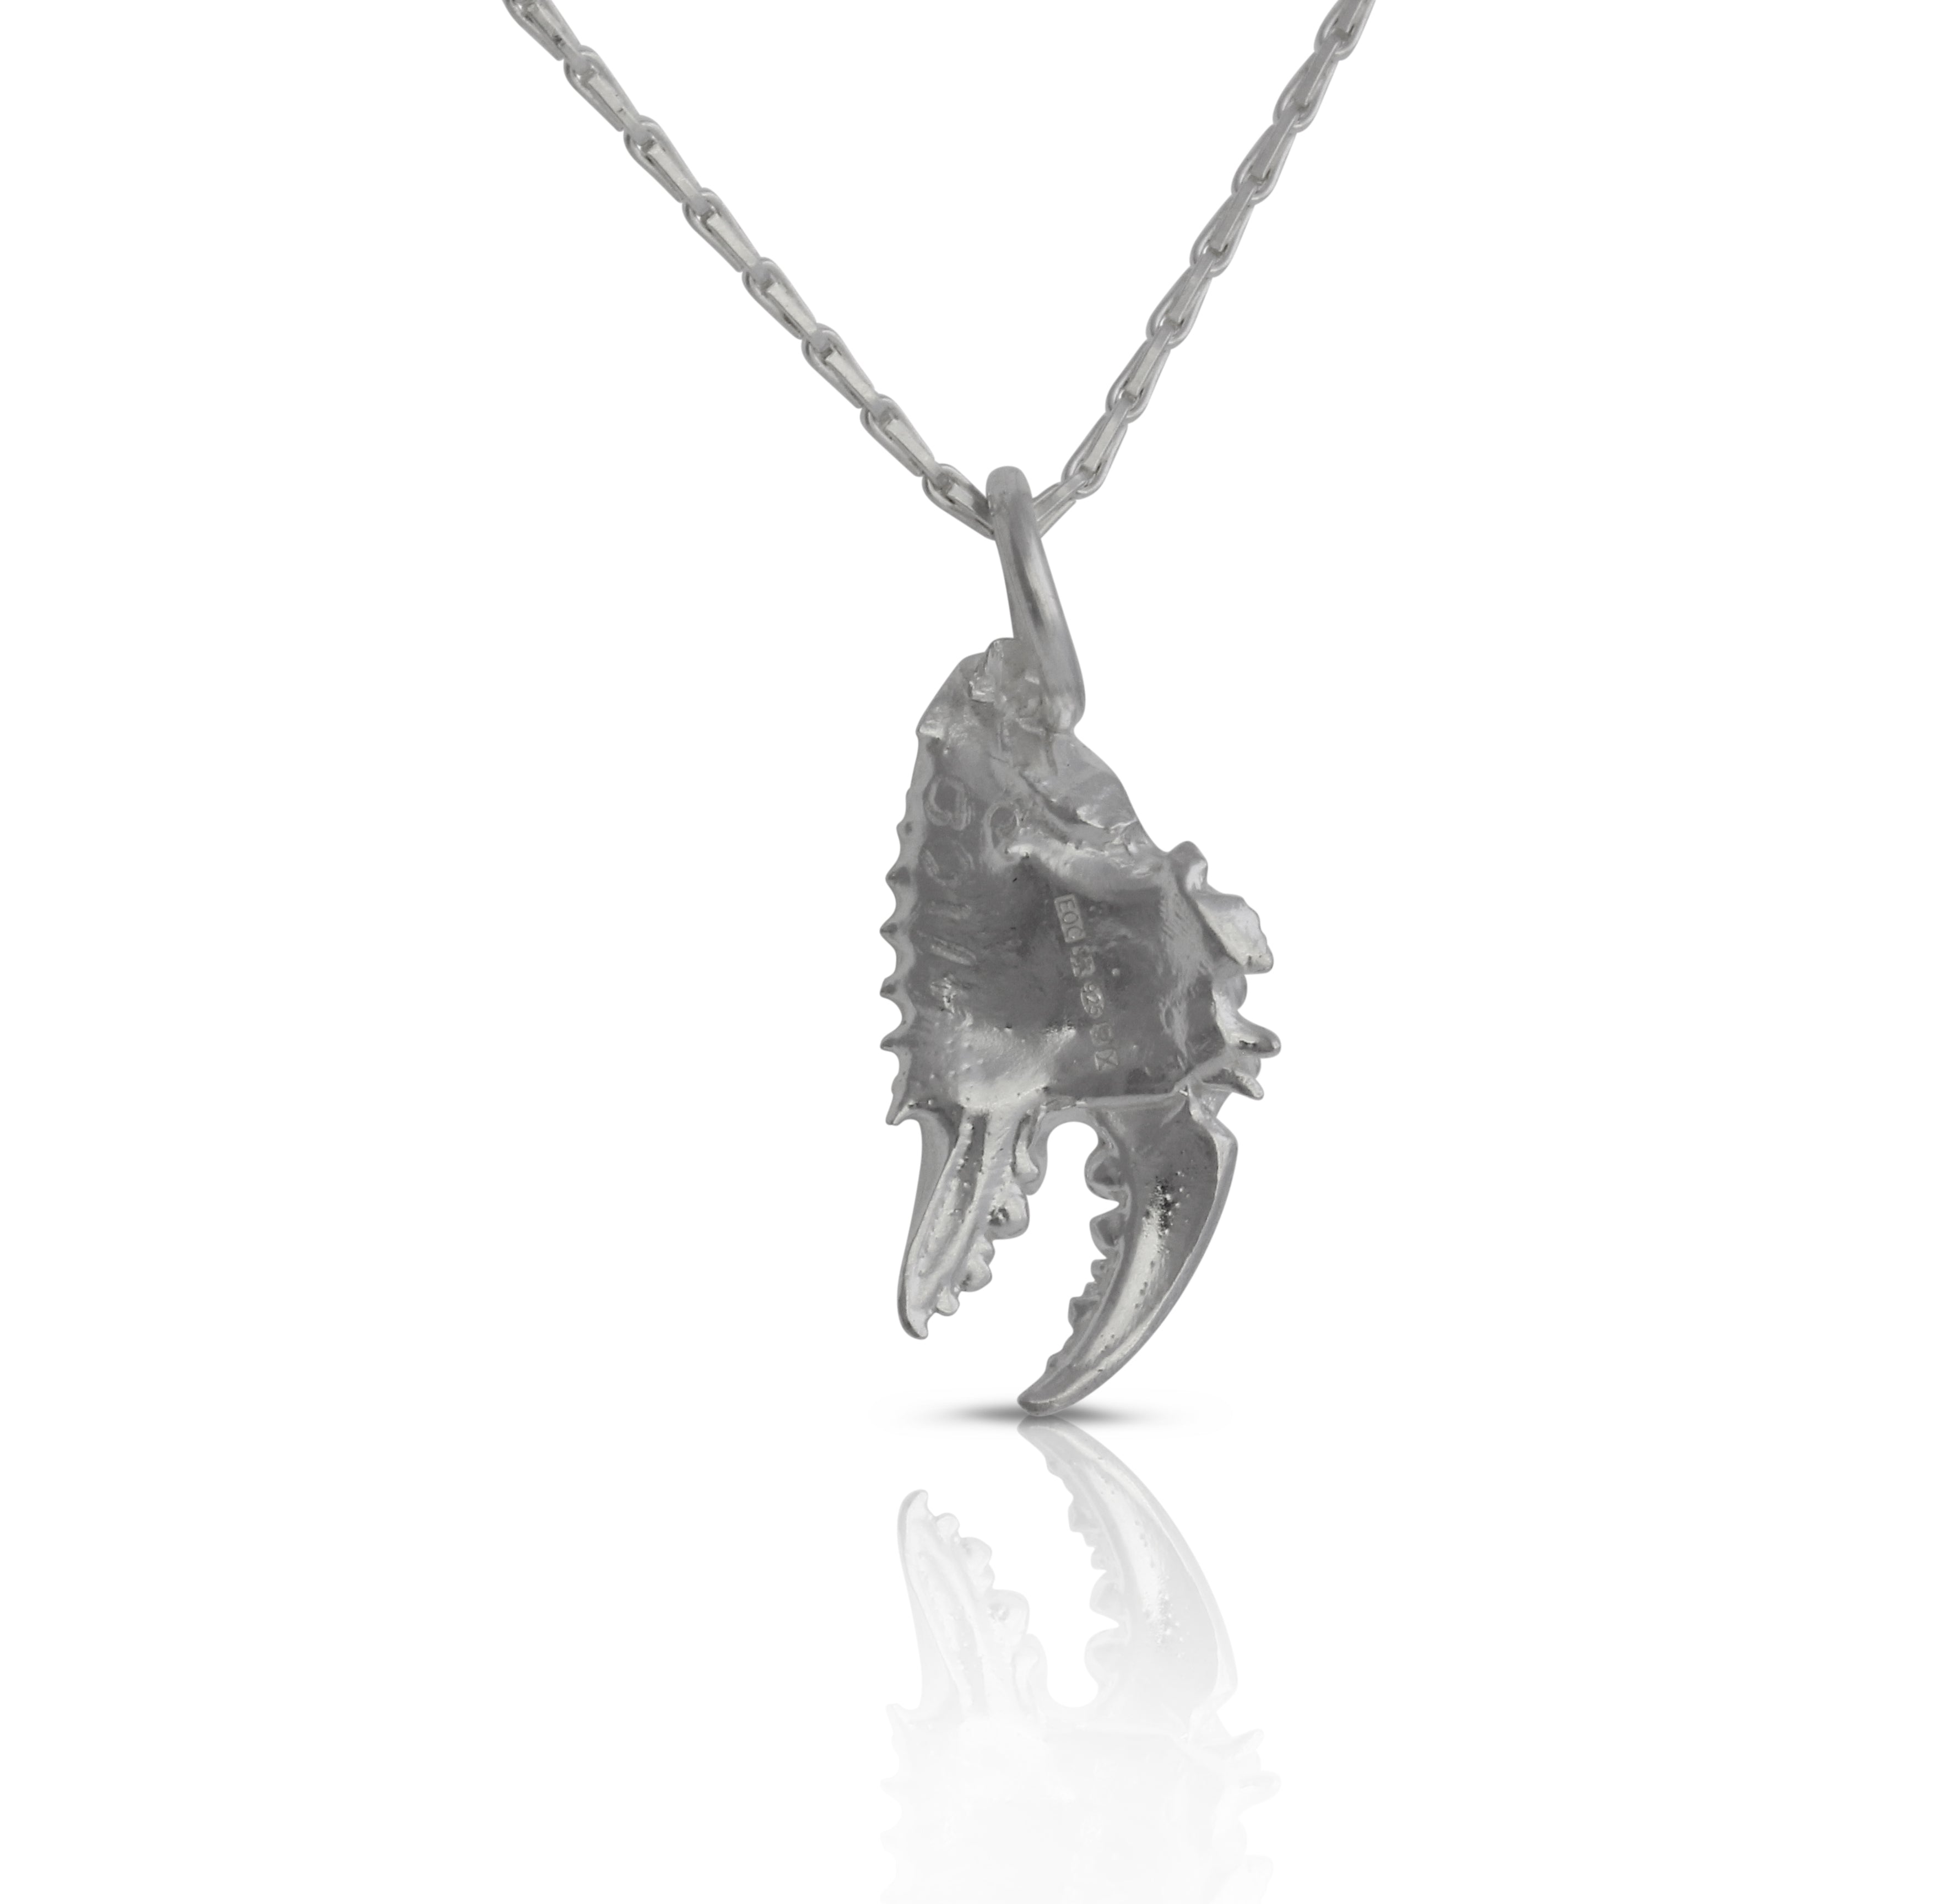 New spikey crab claw necklace - EilyOConnell